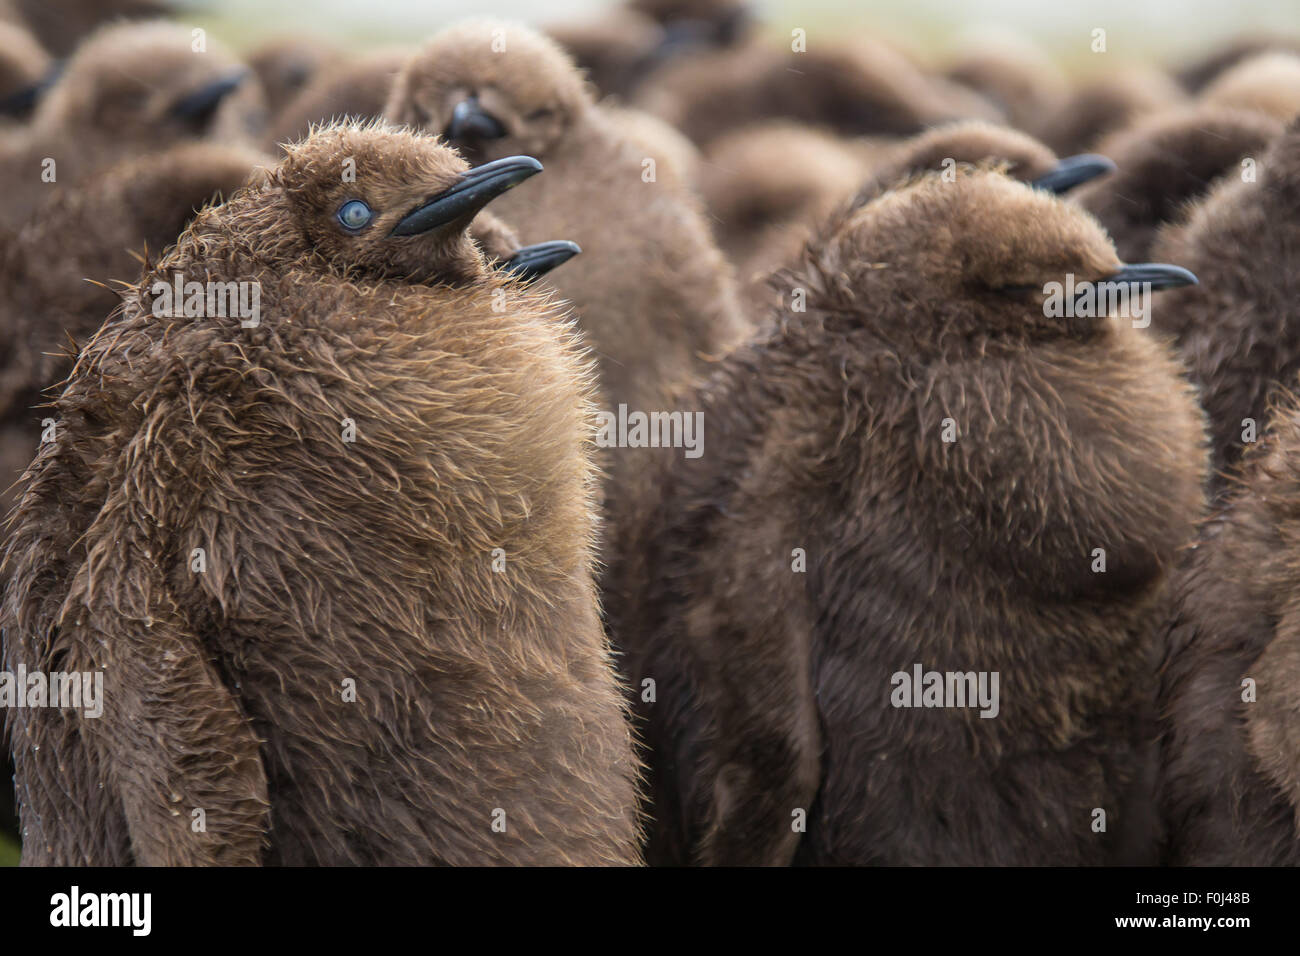 Brown feathered King Penguin Chicks standing huddled together in the rain. Volunteer Point, Falkland Islands. Stock Photo